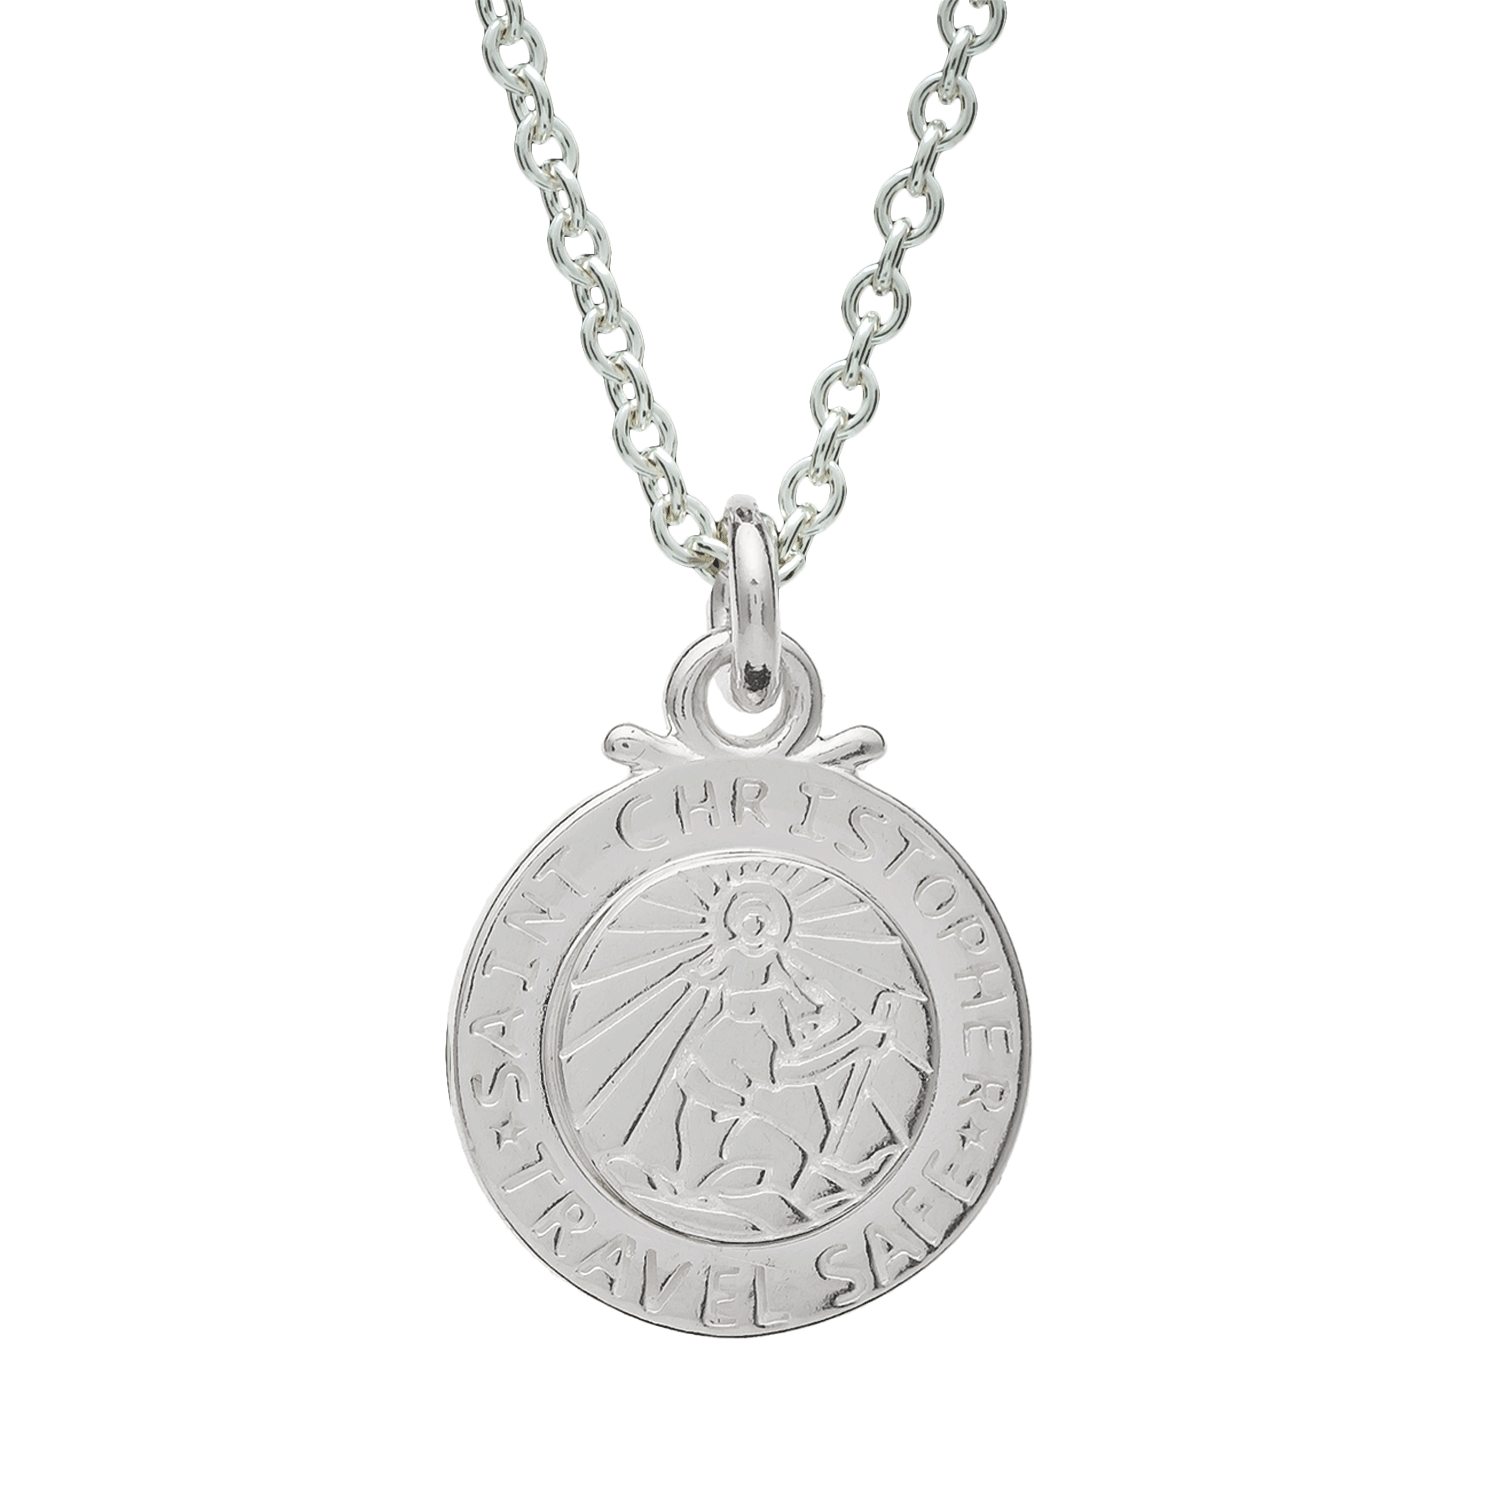 trace chain small woman off the man saint Christophe necklace UK